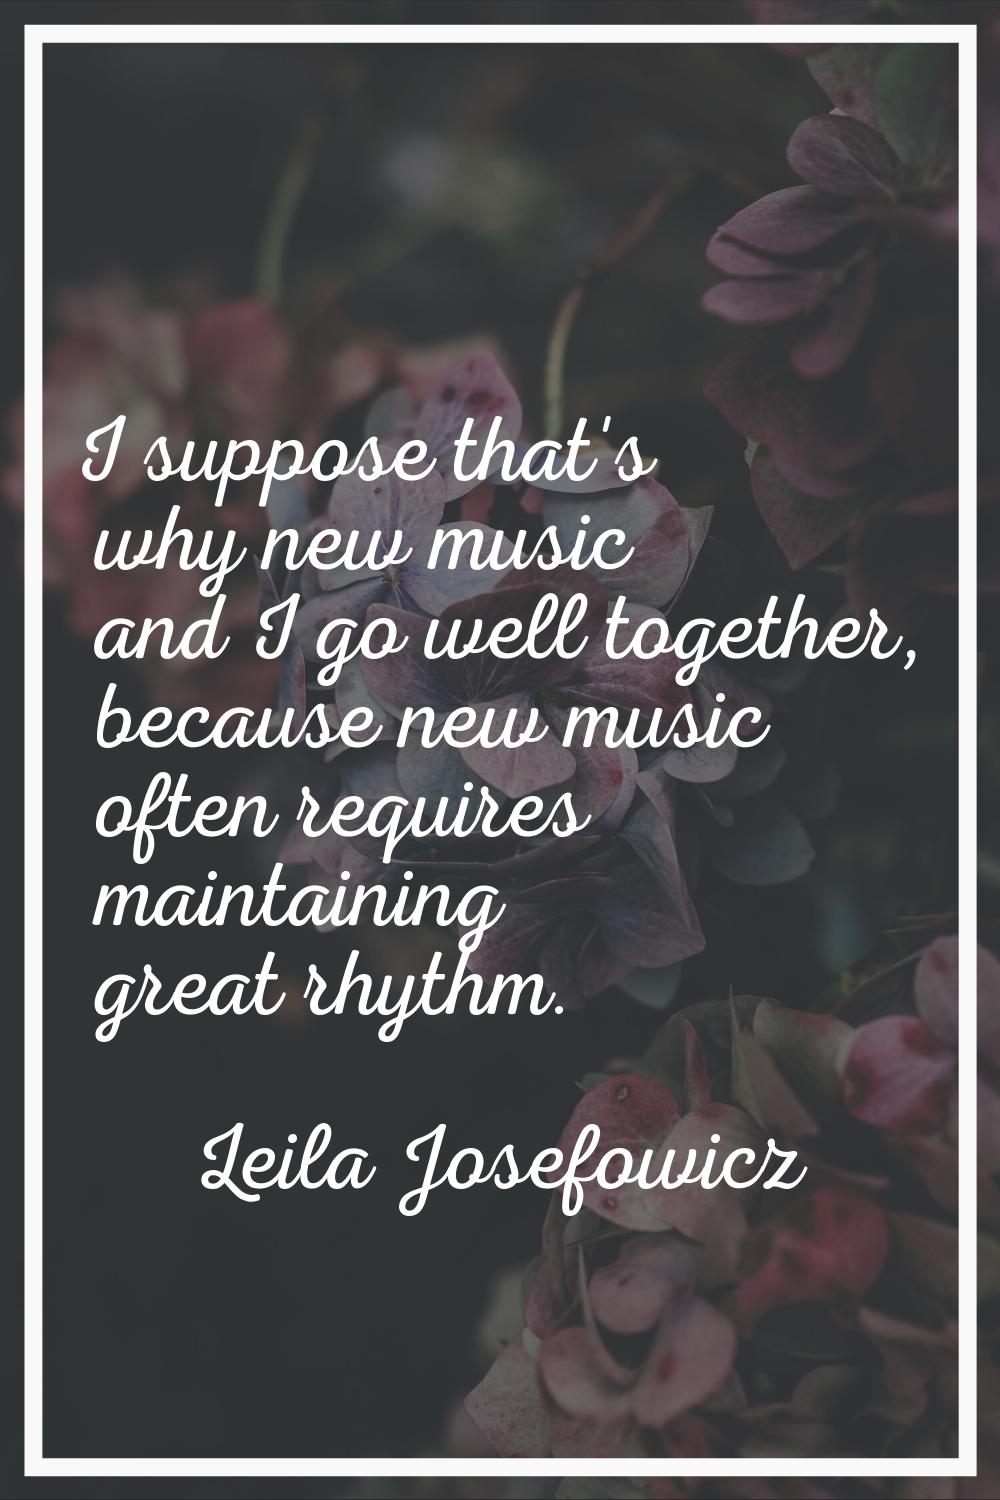 I suppose that's why new music and I go well together, because new music often requires maintaining